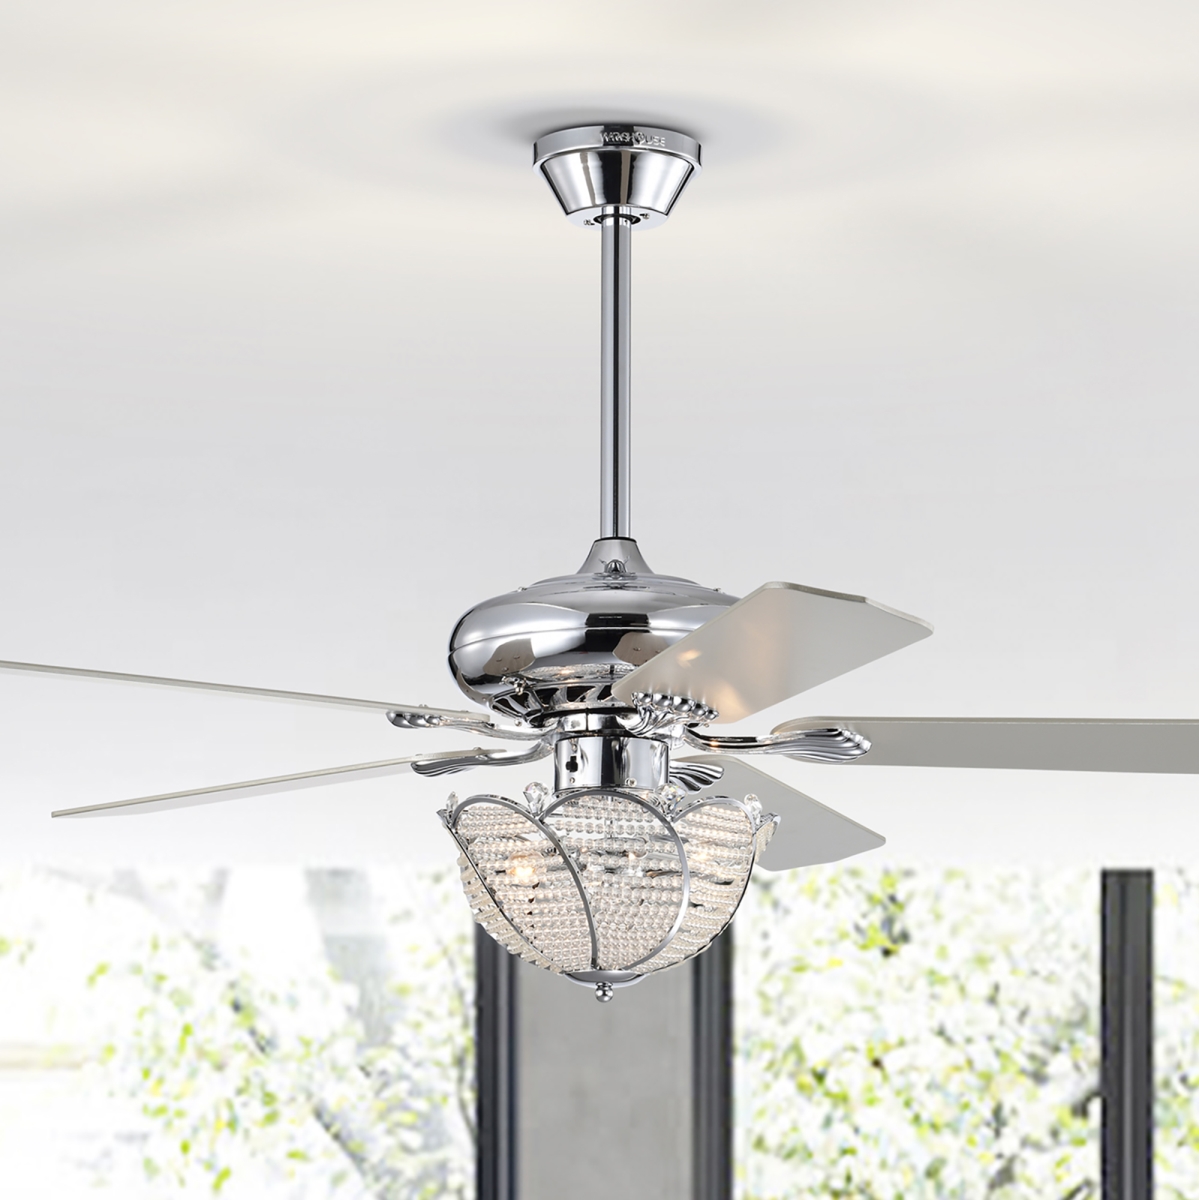 Araceli 52 in. 3-Light Indoor Chrome Finish Ceiling Fan with Light Kit and Remote